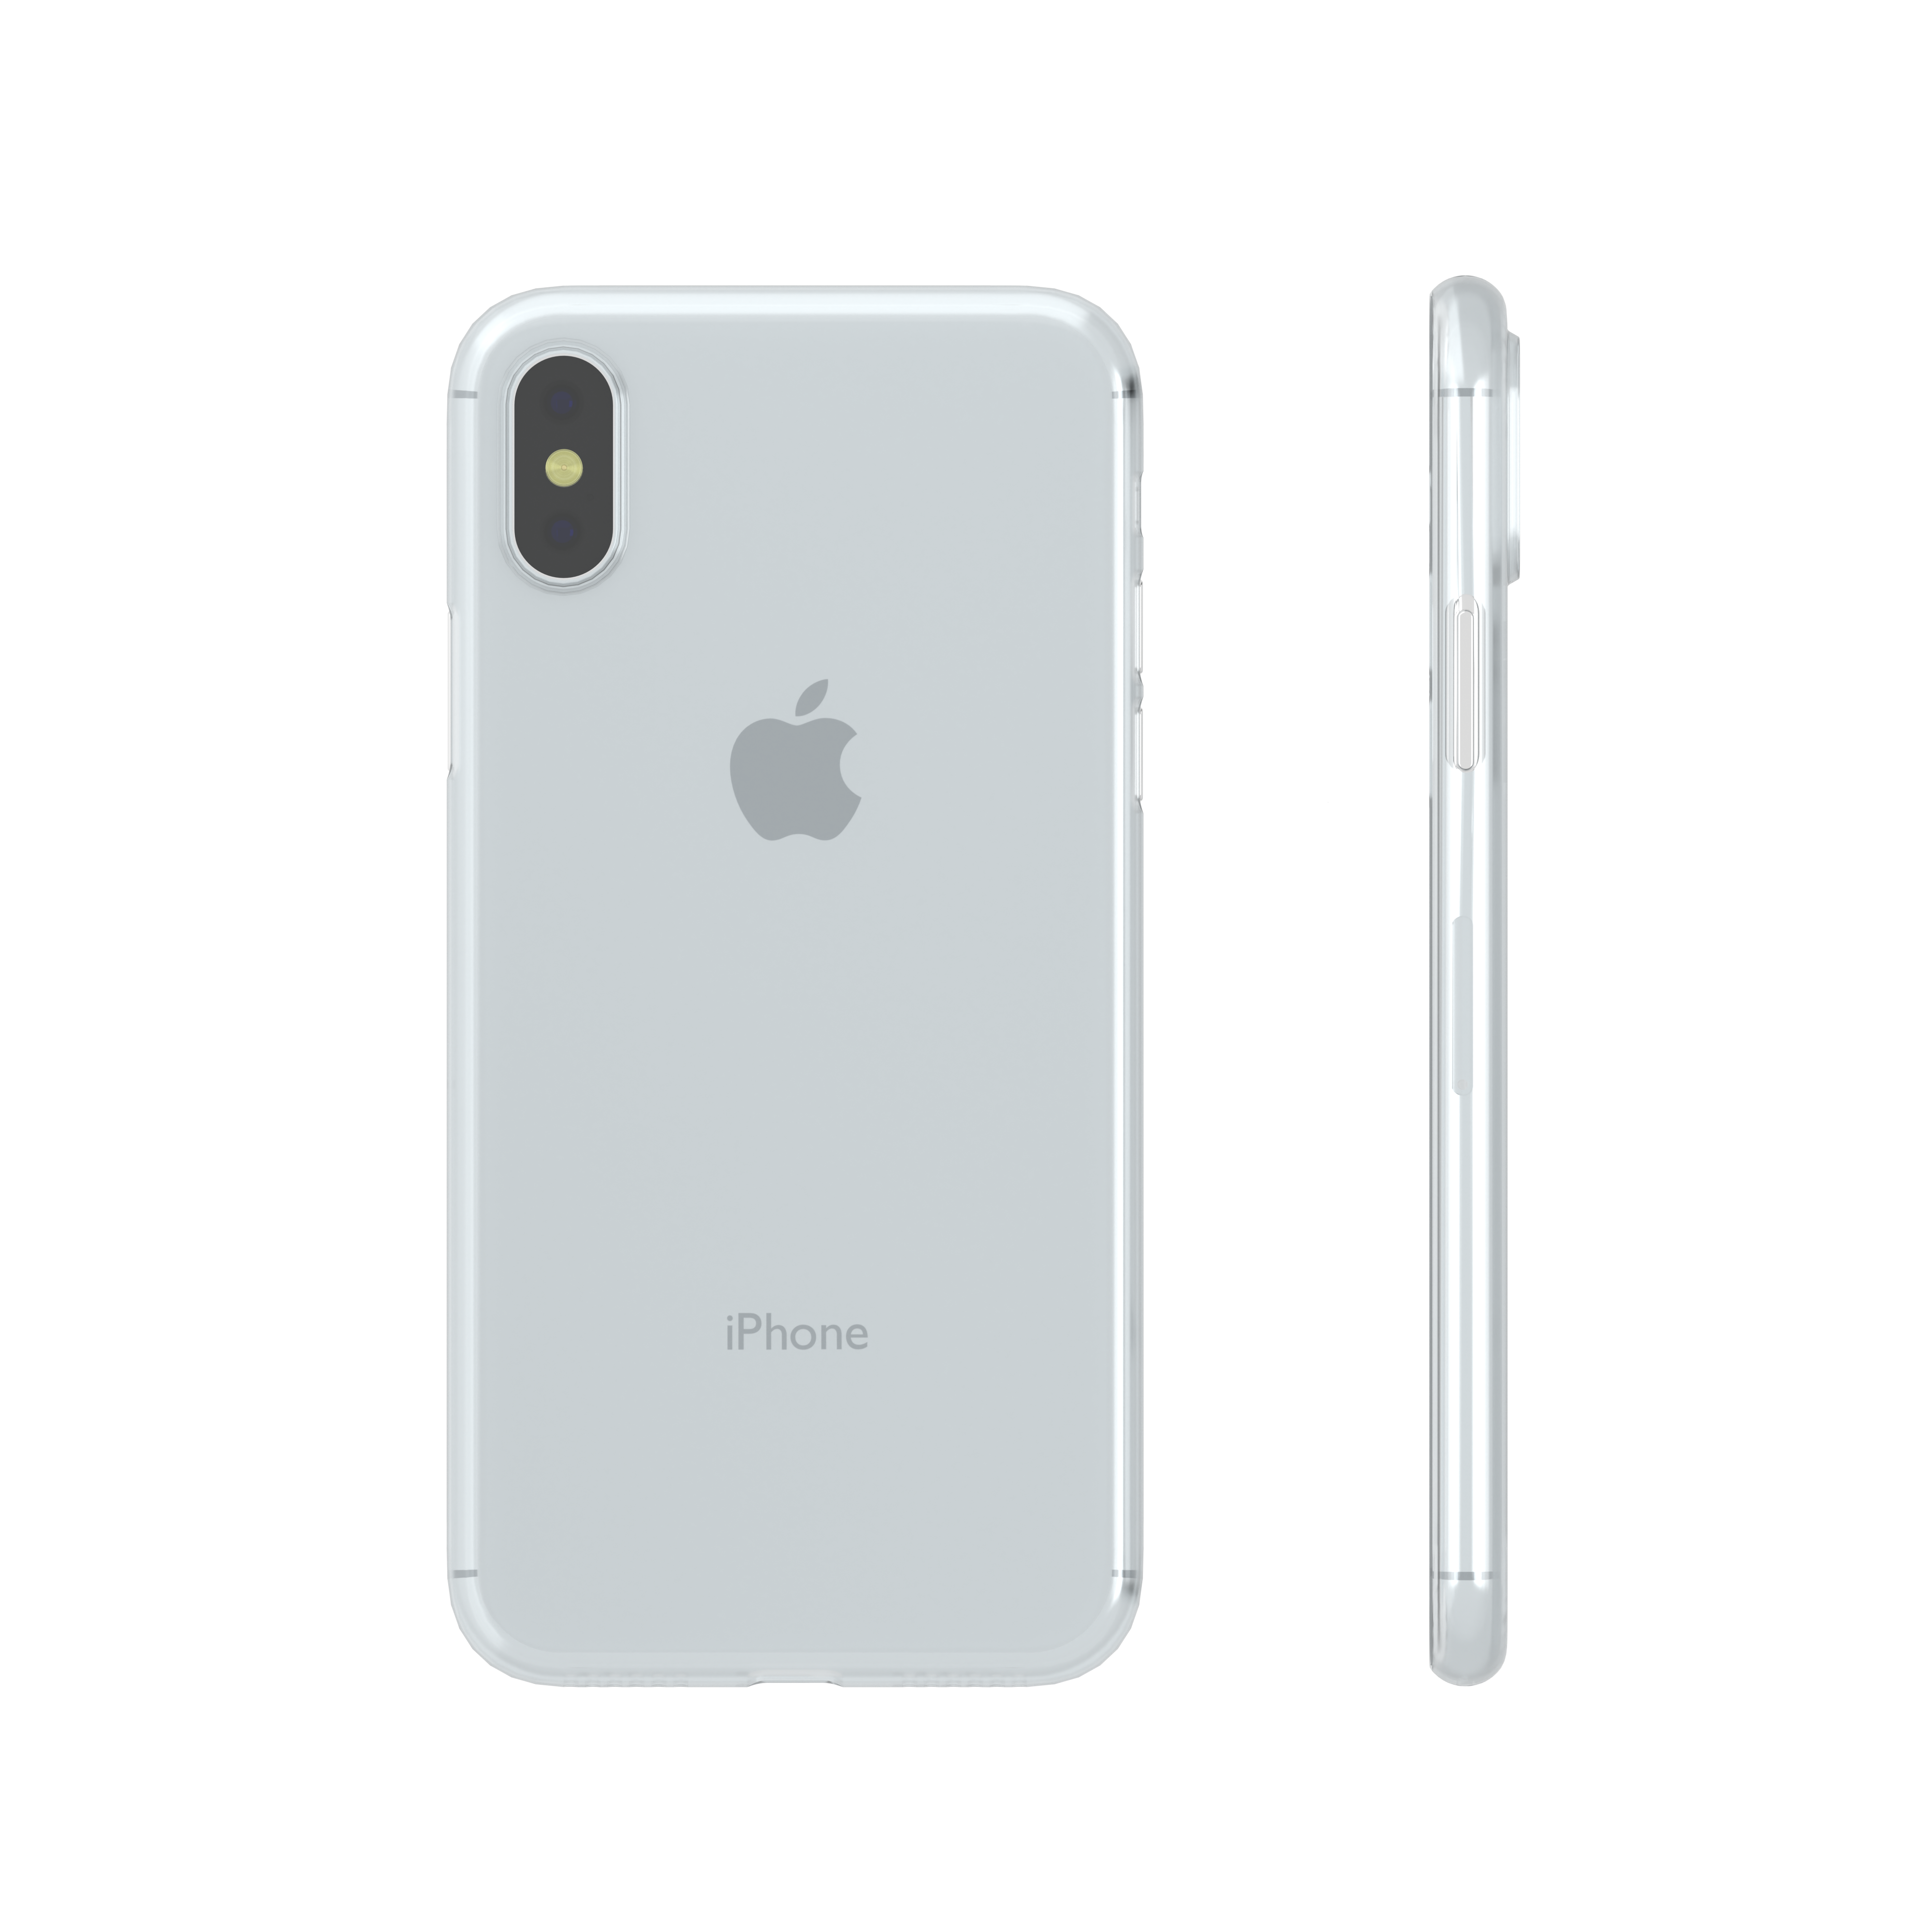 Slimcase for iPhone XS Max